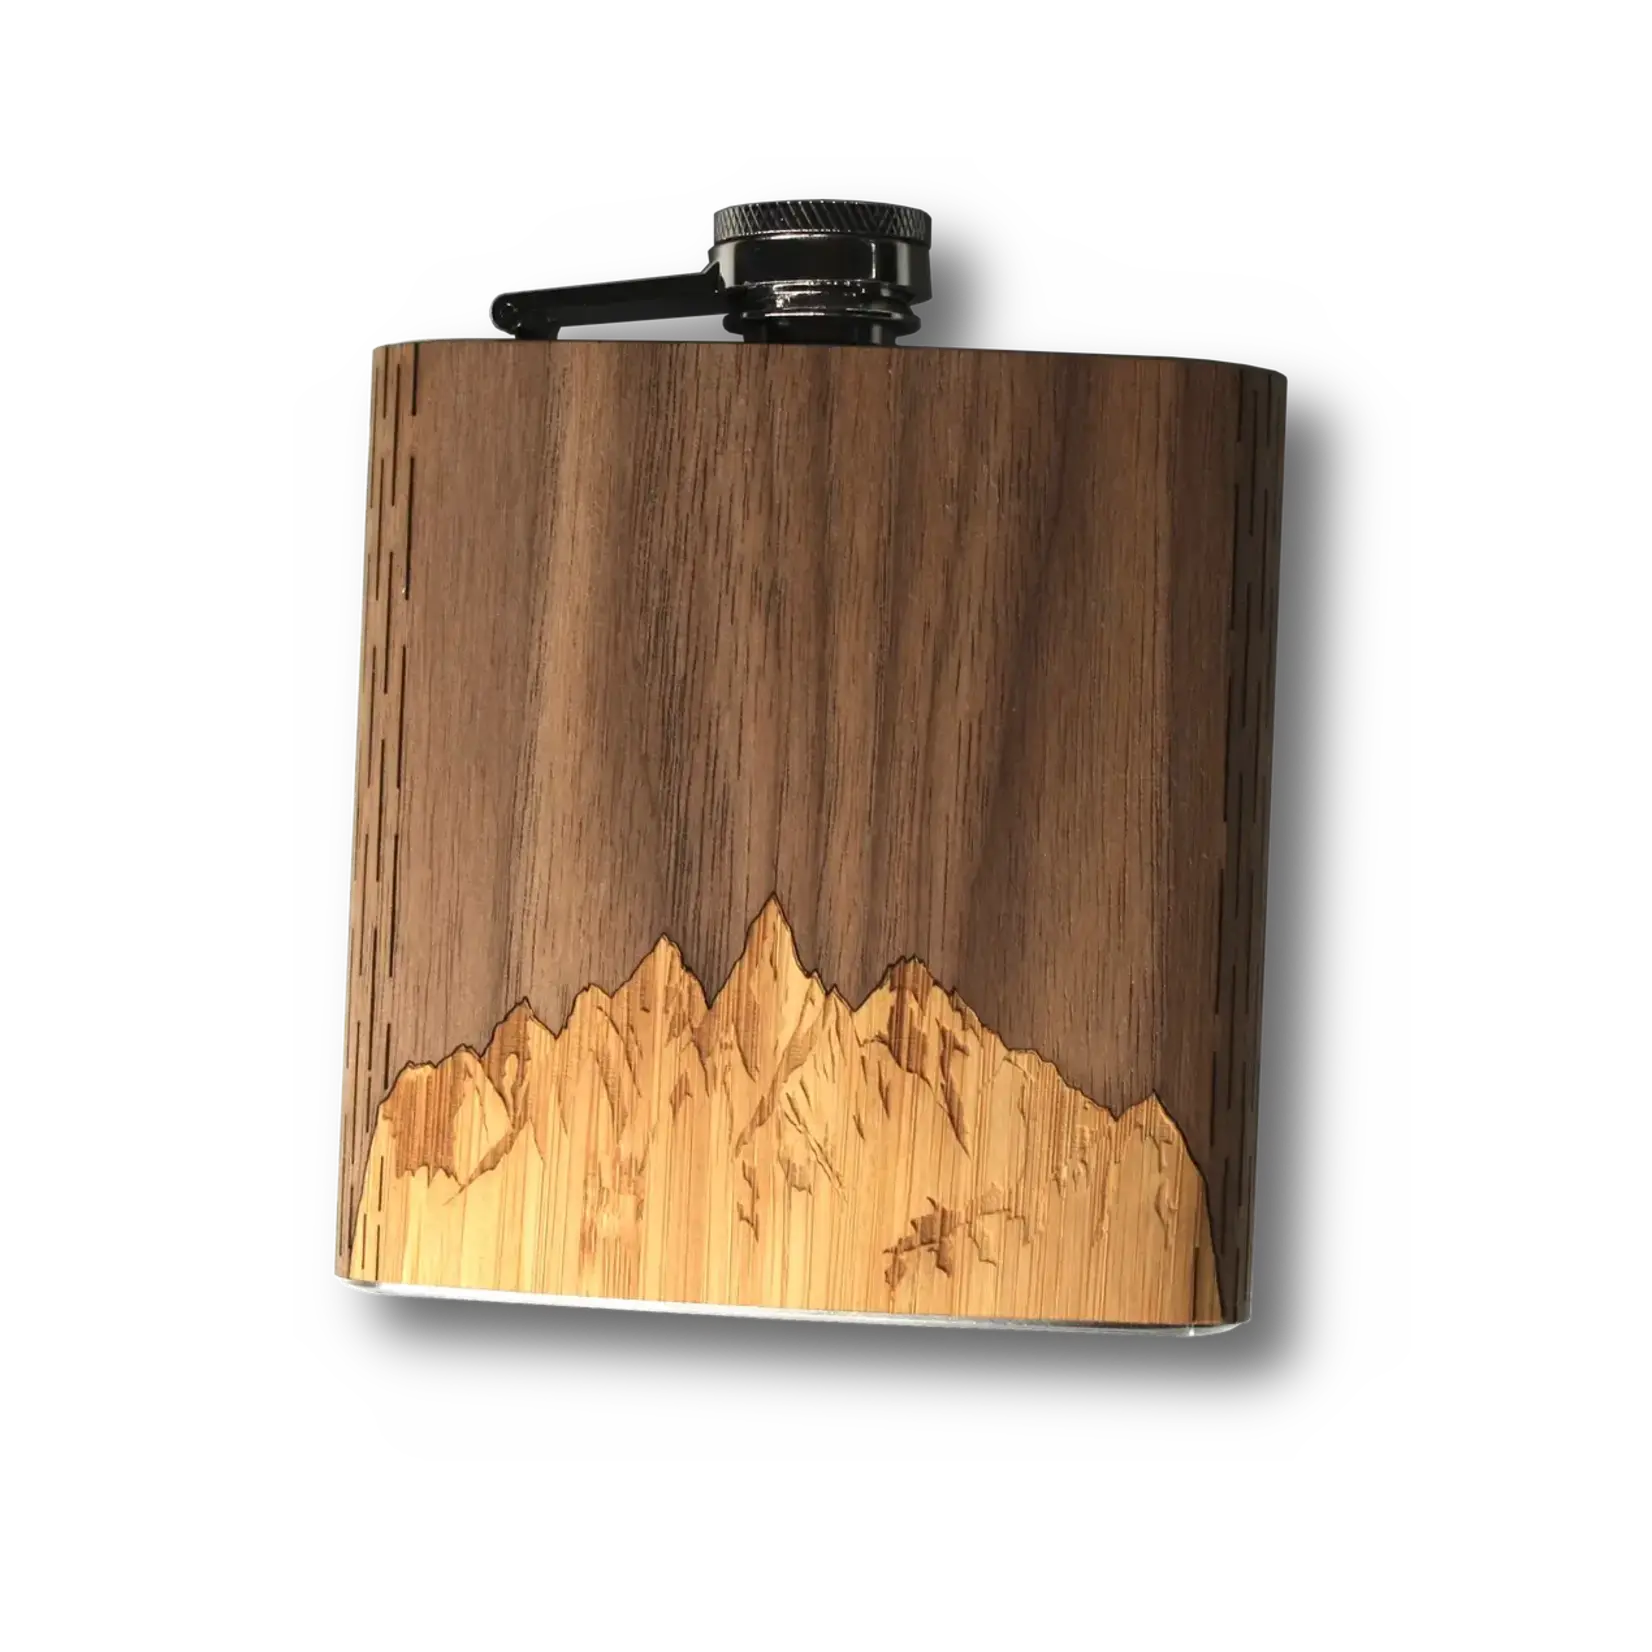 WUDN Handcrafted Mountains Wood + Stainless Steel Hip Flask